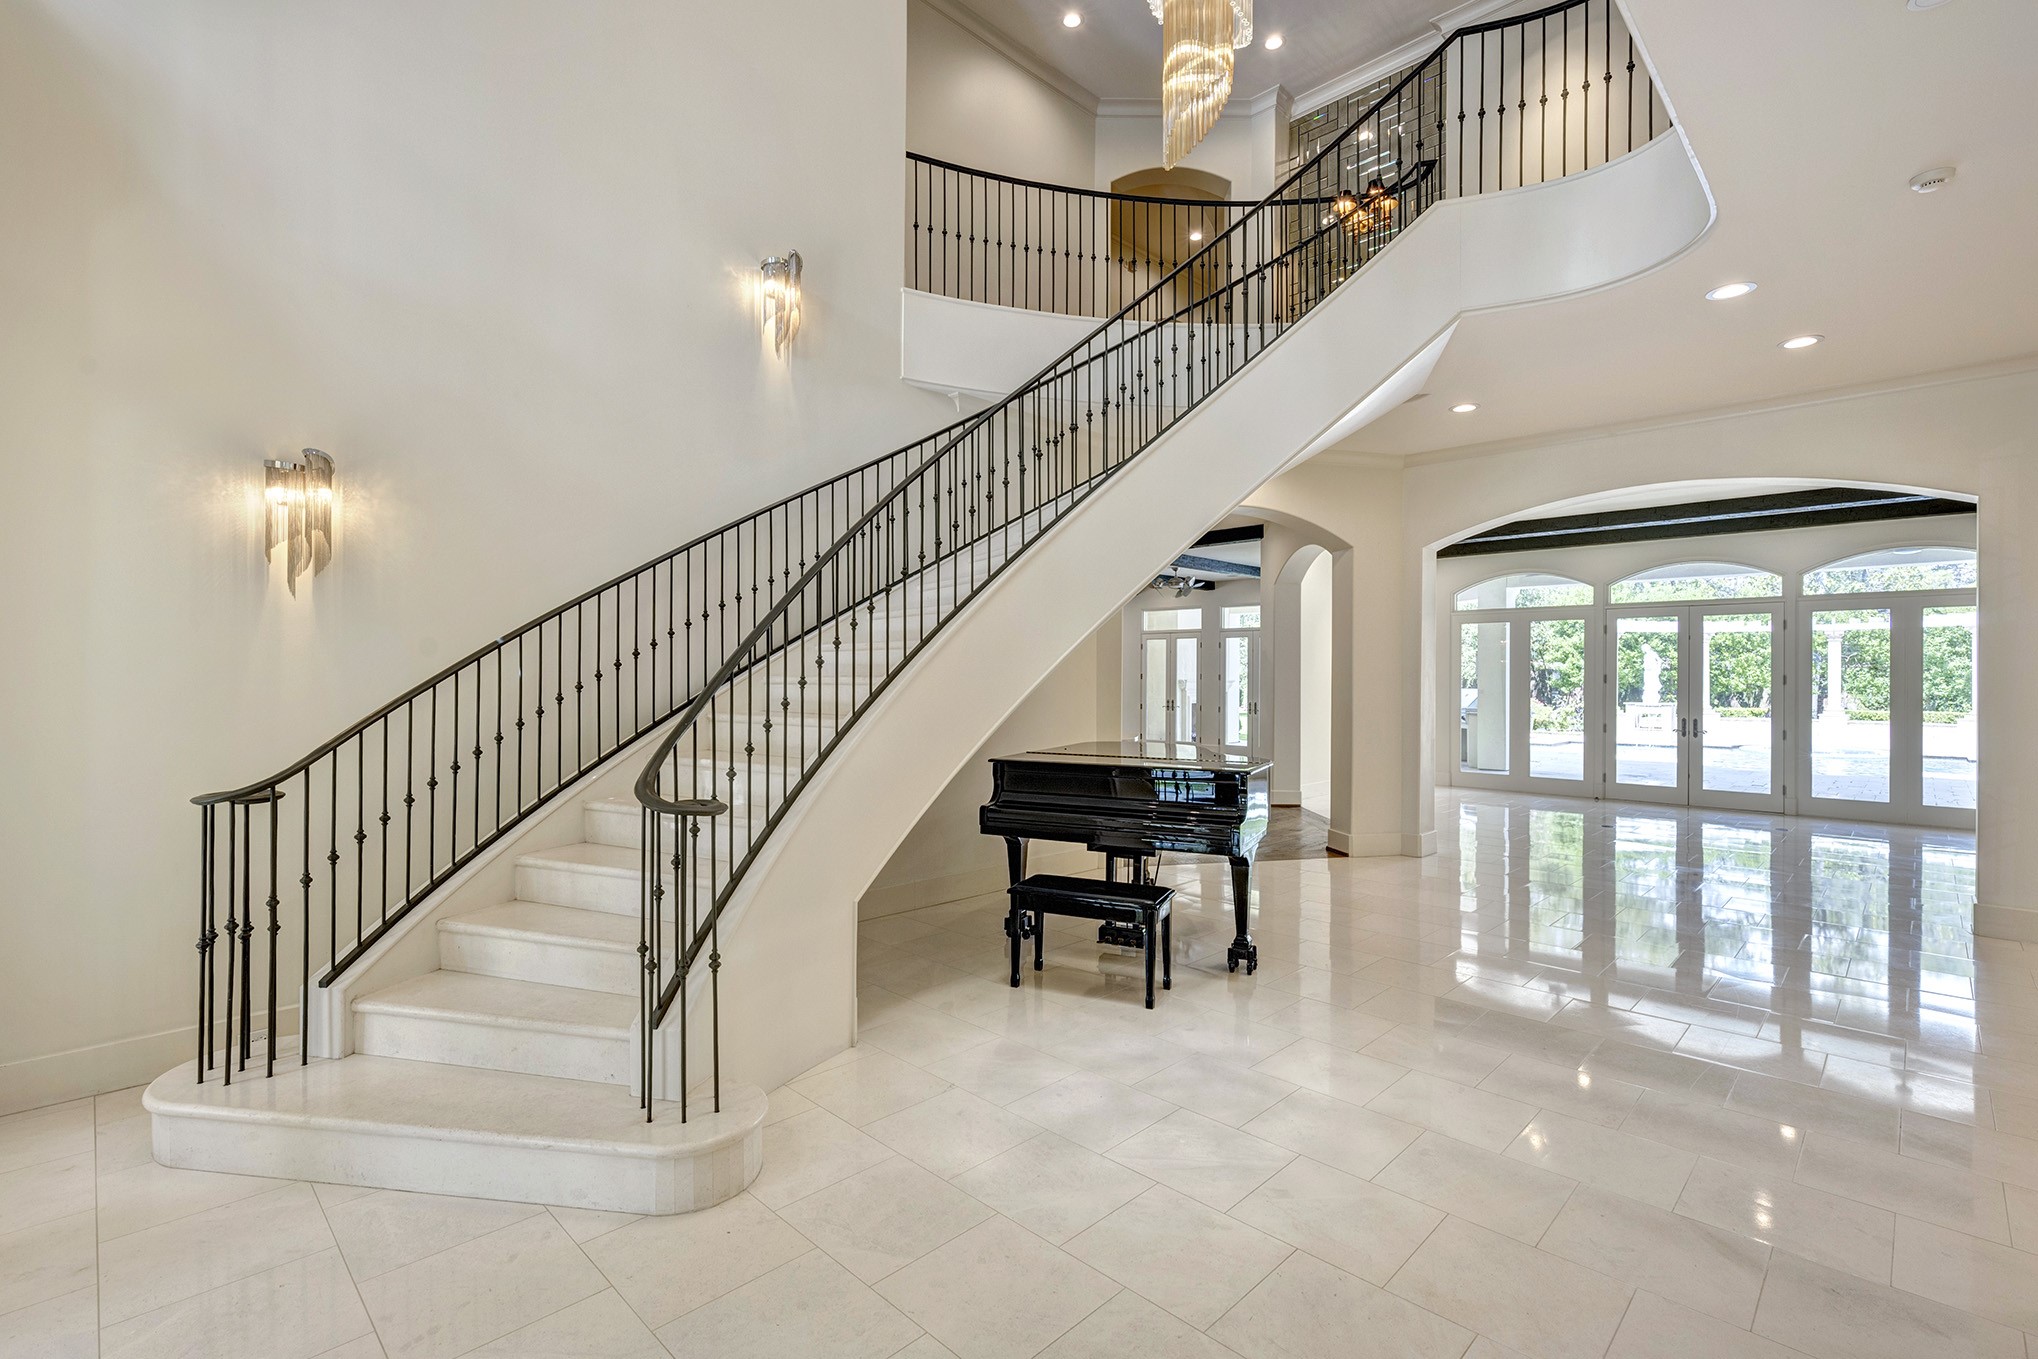 Formal Entry with limestone floors and stairwell with limestone treads, risers with iron rail